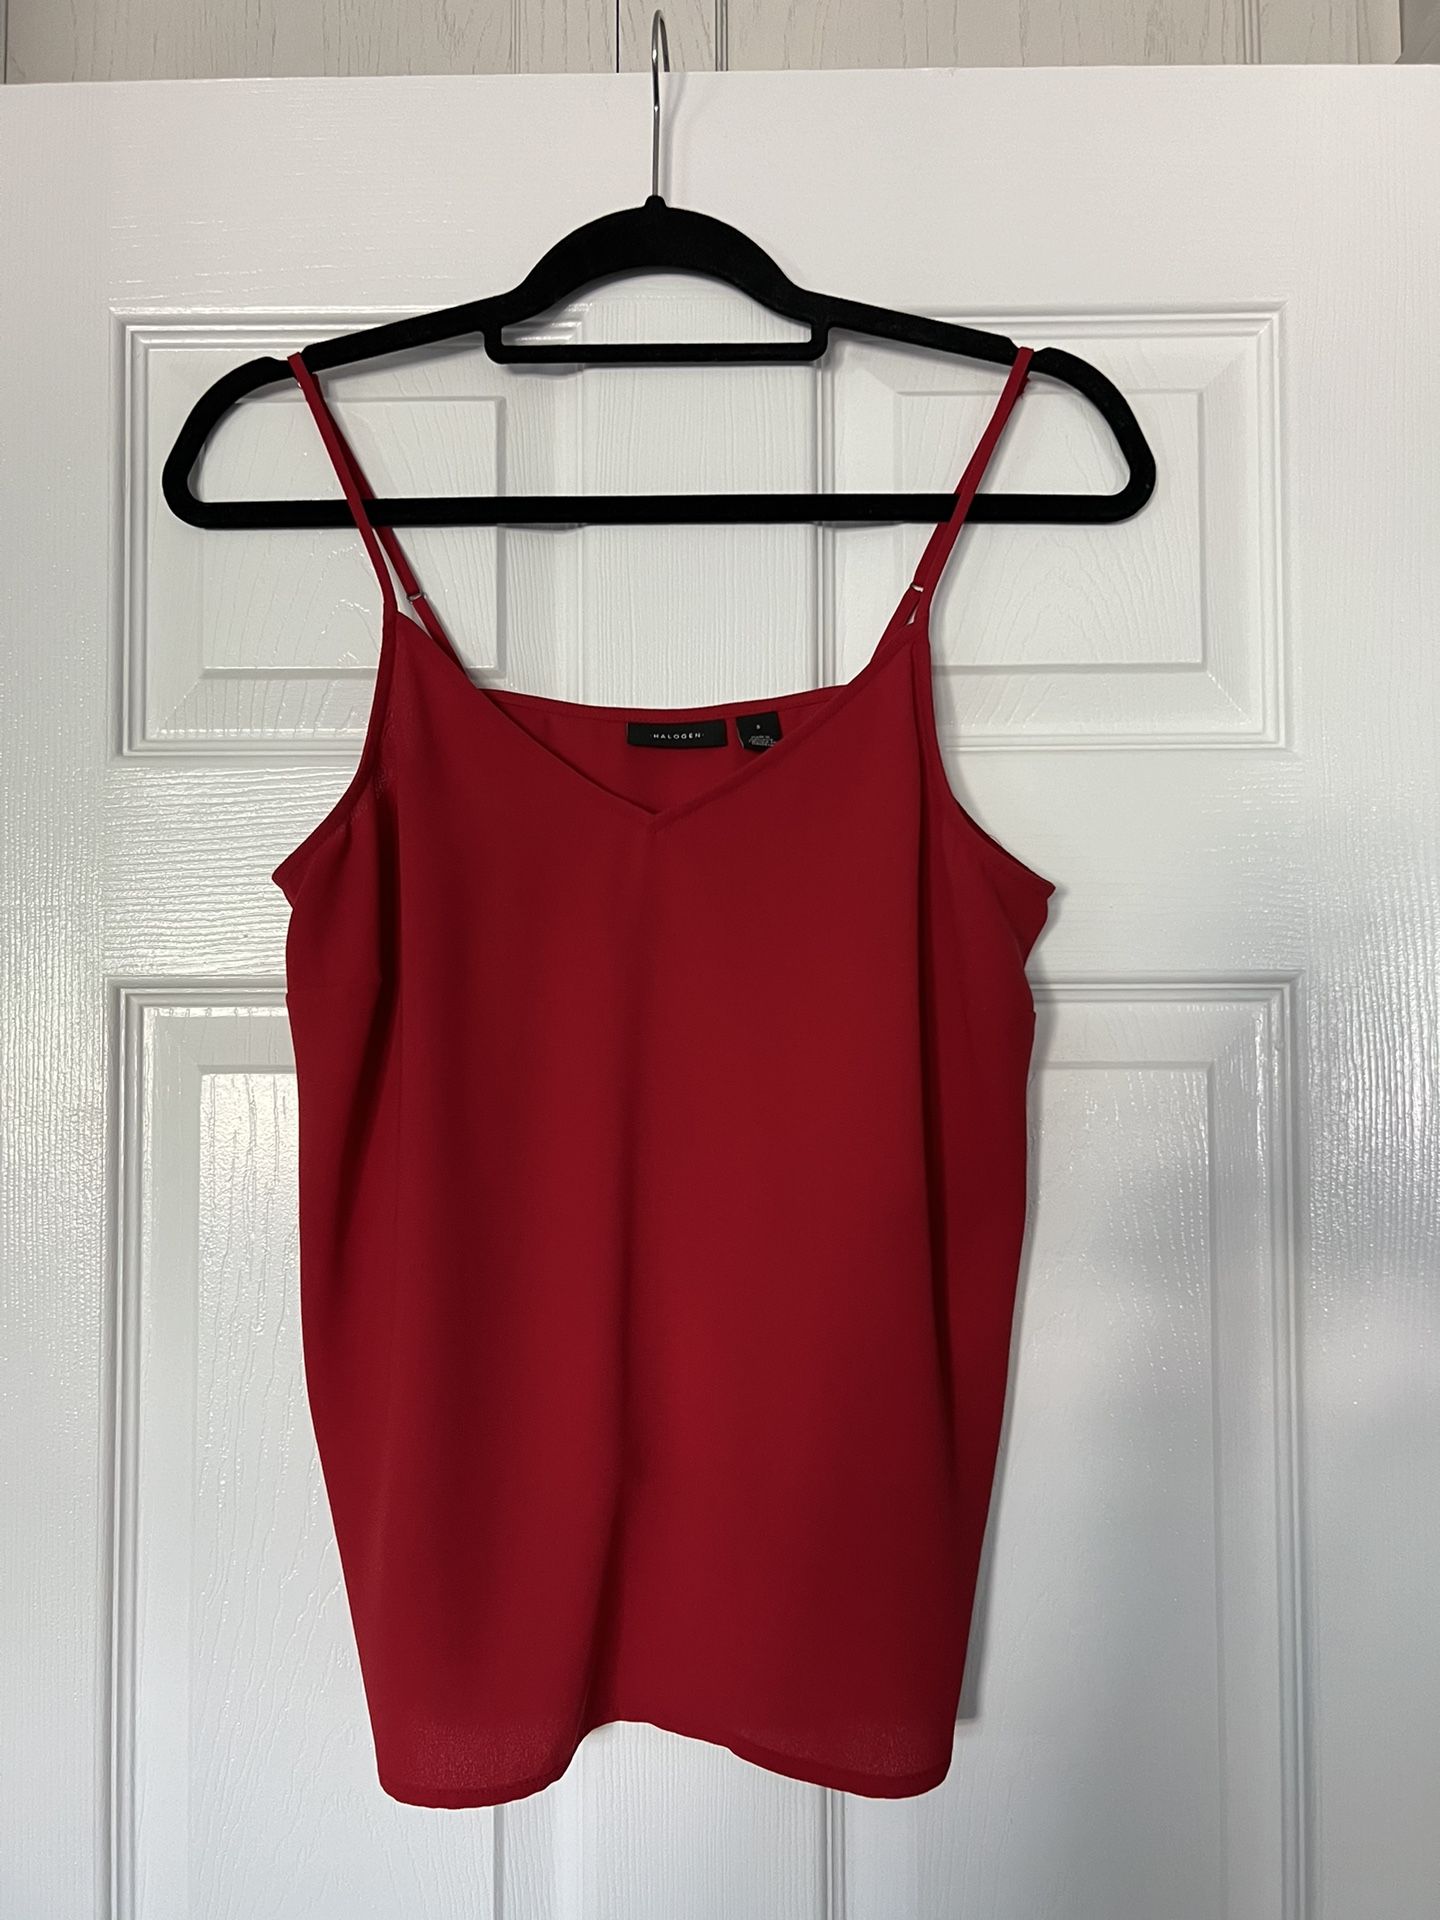 Nordstrom Camisole Top Size small 